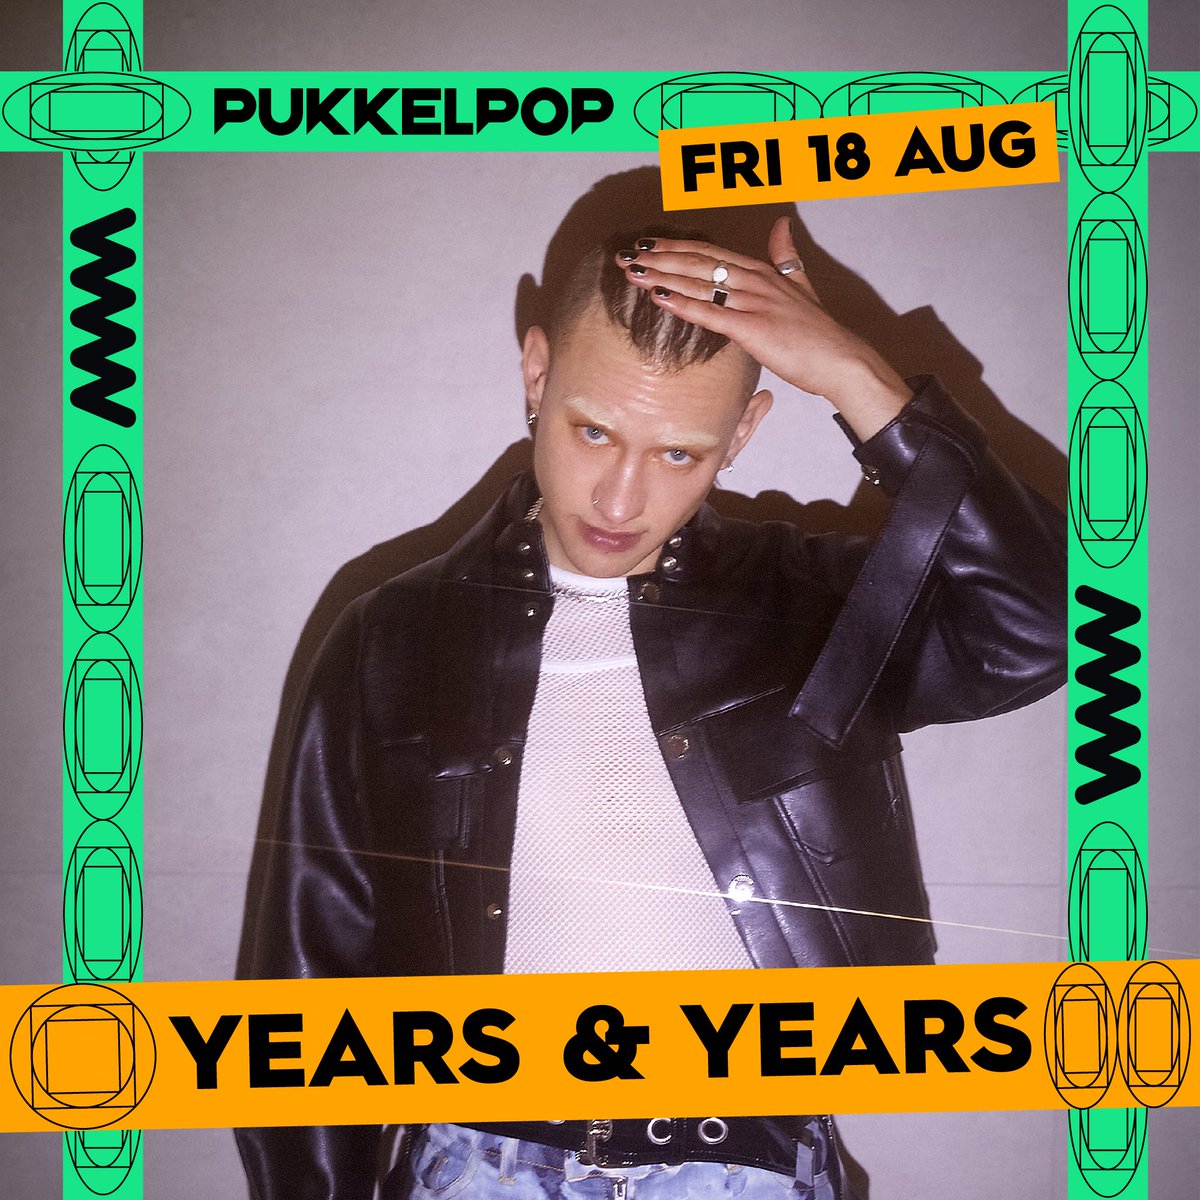 So excited to be heading to Belgium in August for @pukkelpop festival! tickets.pukkelpop.be